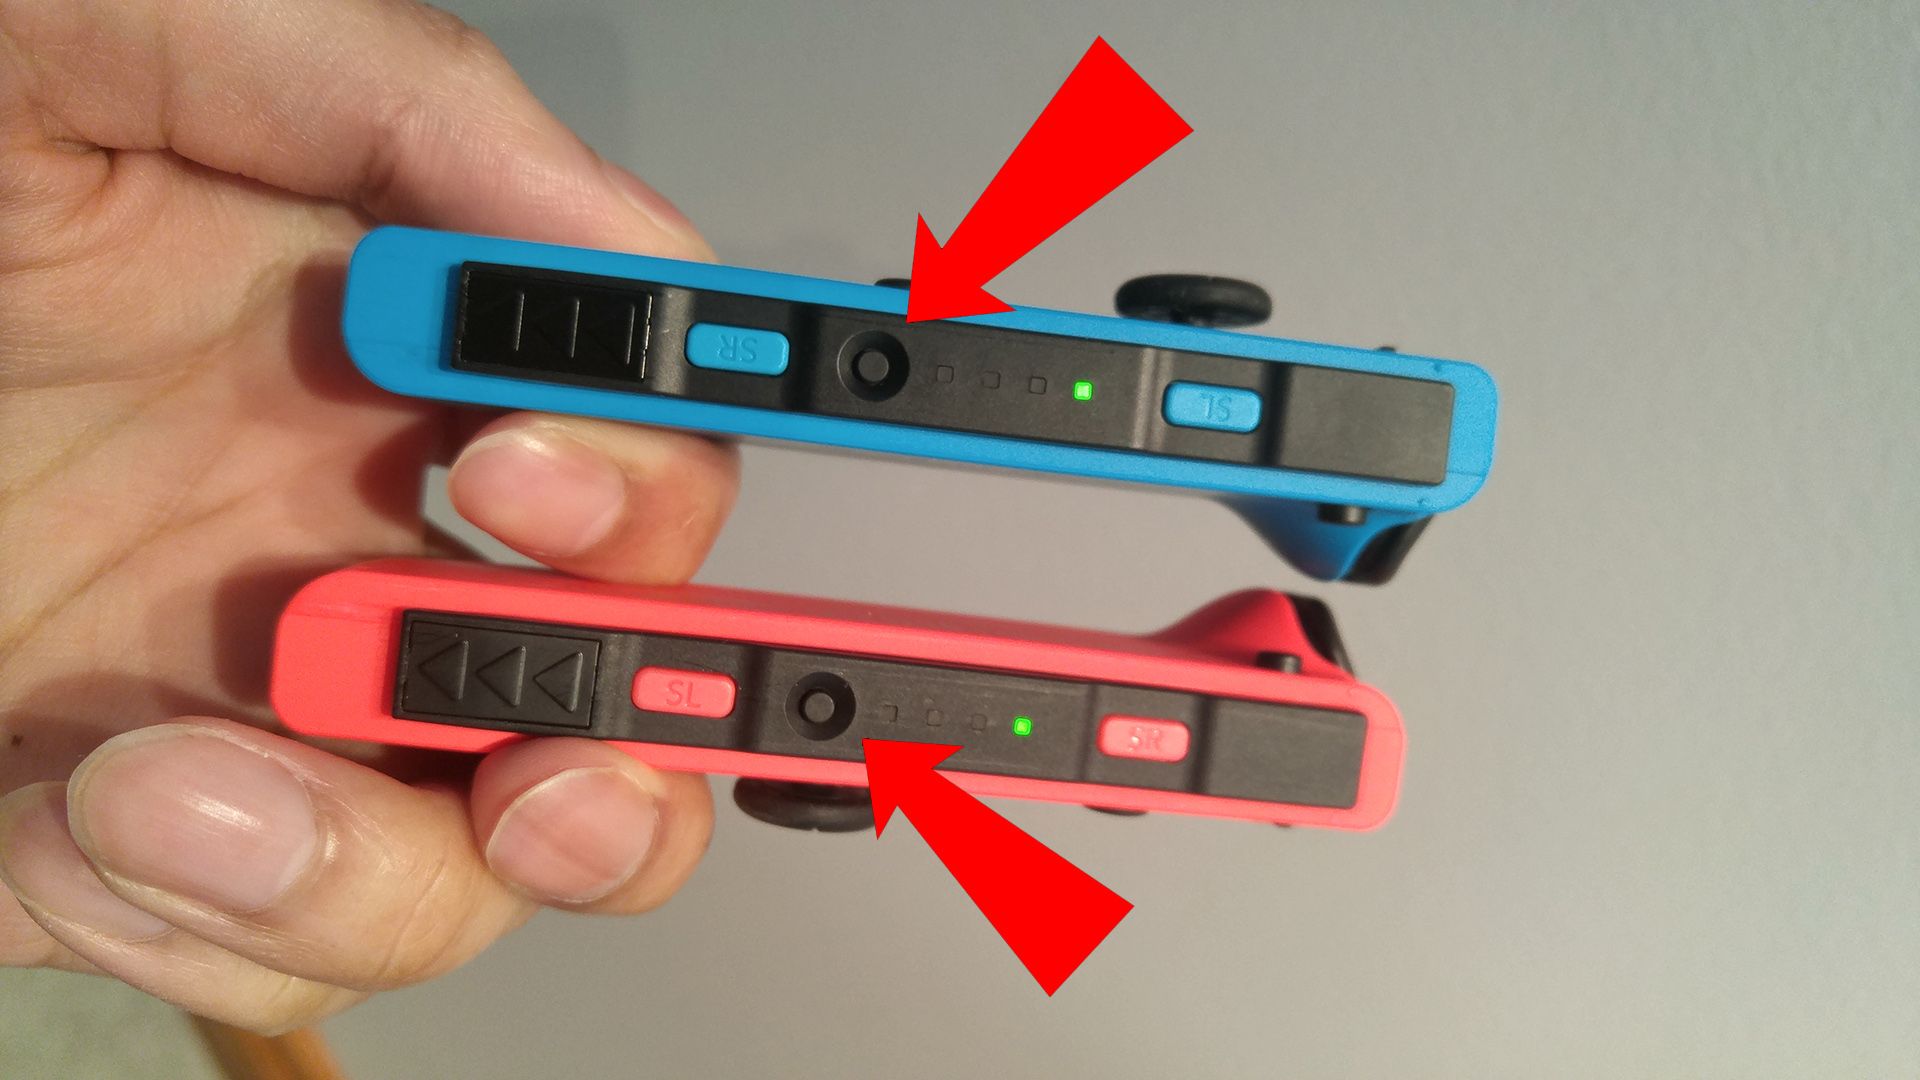 Red arrows pointing to the "Sync" buttons on two Joy-Cons.